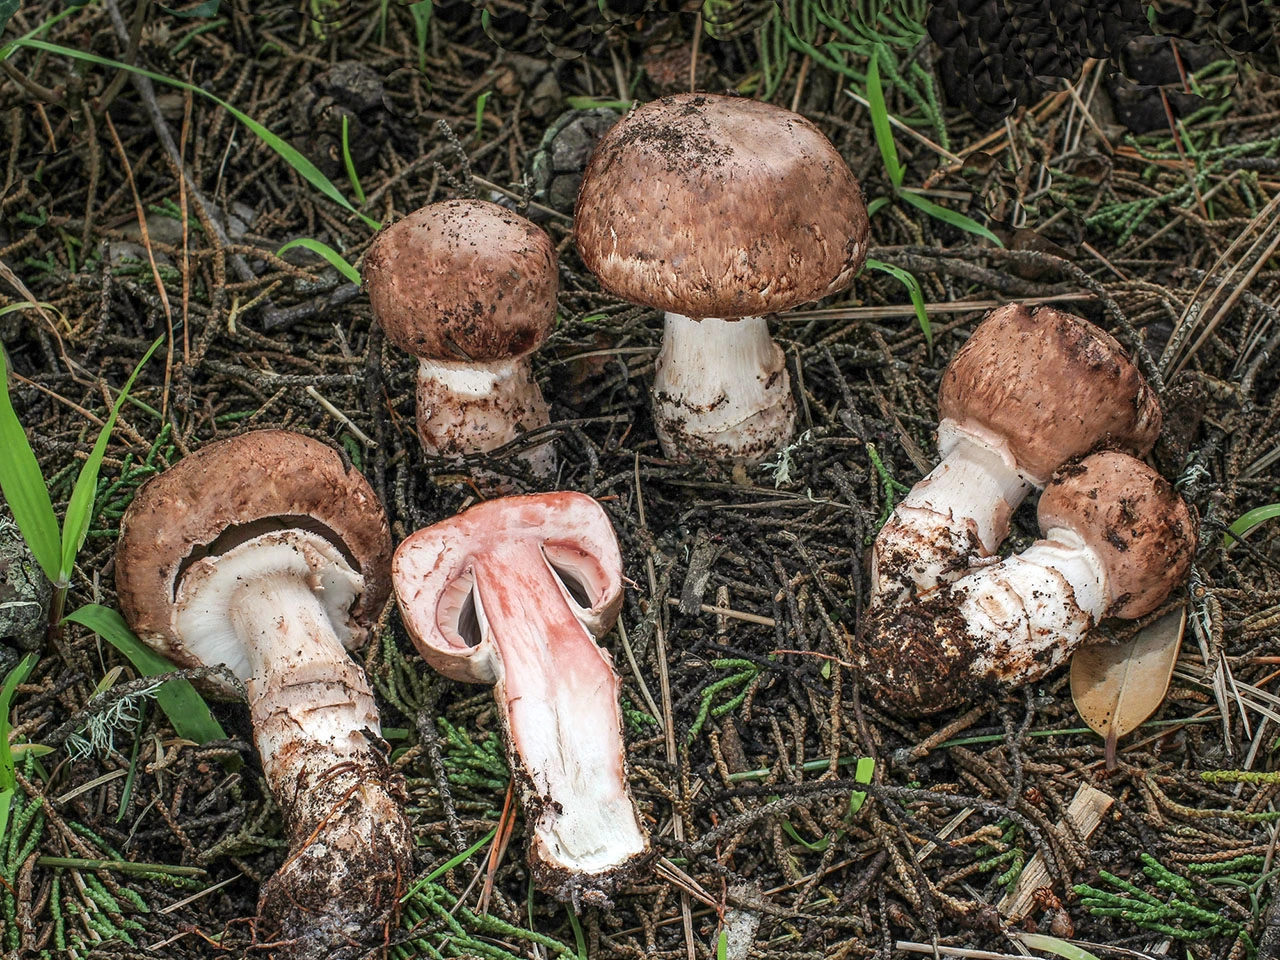 What Are the Effects of Agaricus Extract on the Human Body?